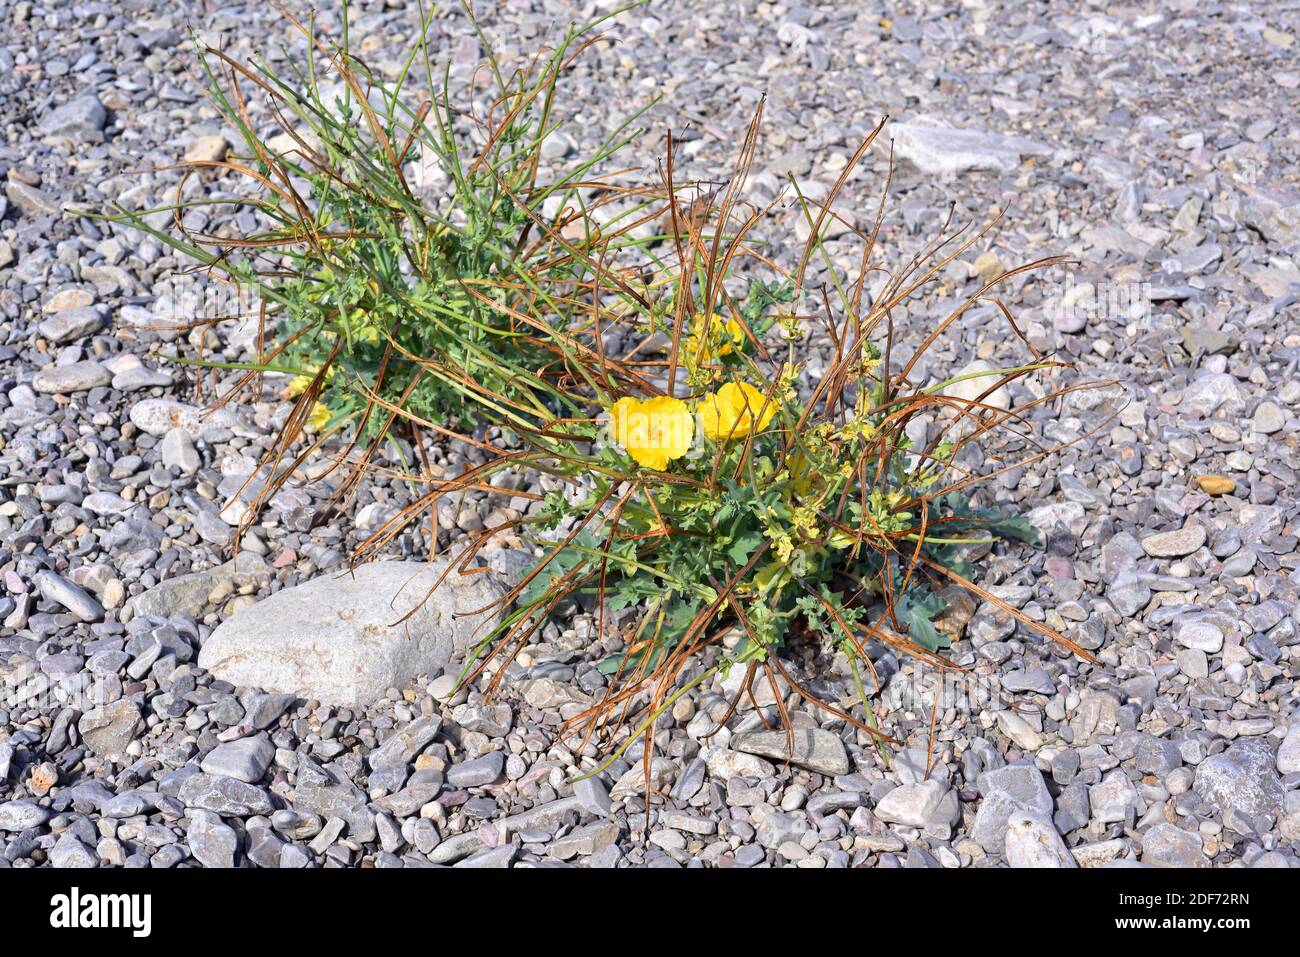 Yellow horned poppy or sea poppy (Glaucium flavum) is a biennial poisonous plant native to Europe, western Asia and North America. This photo was Stock Photo